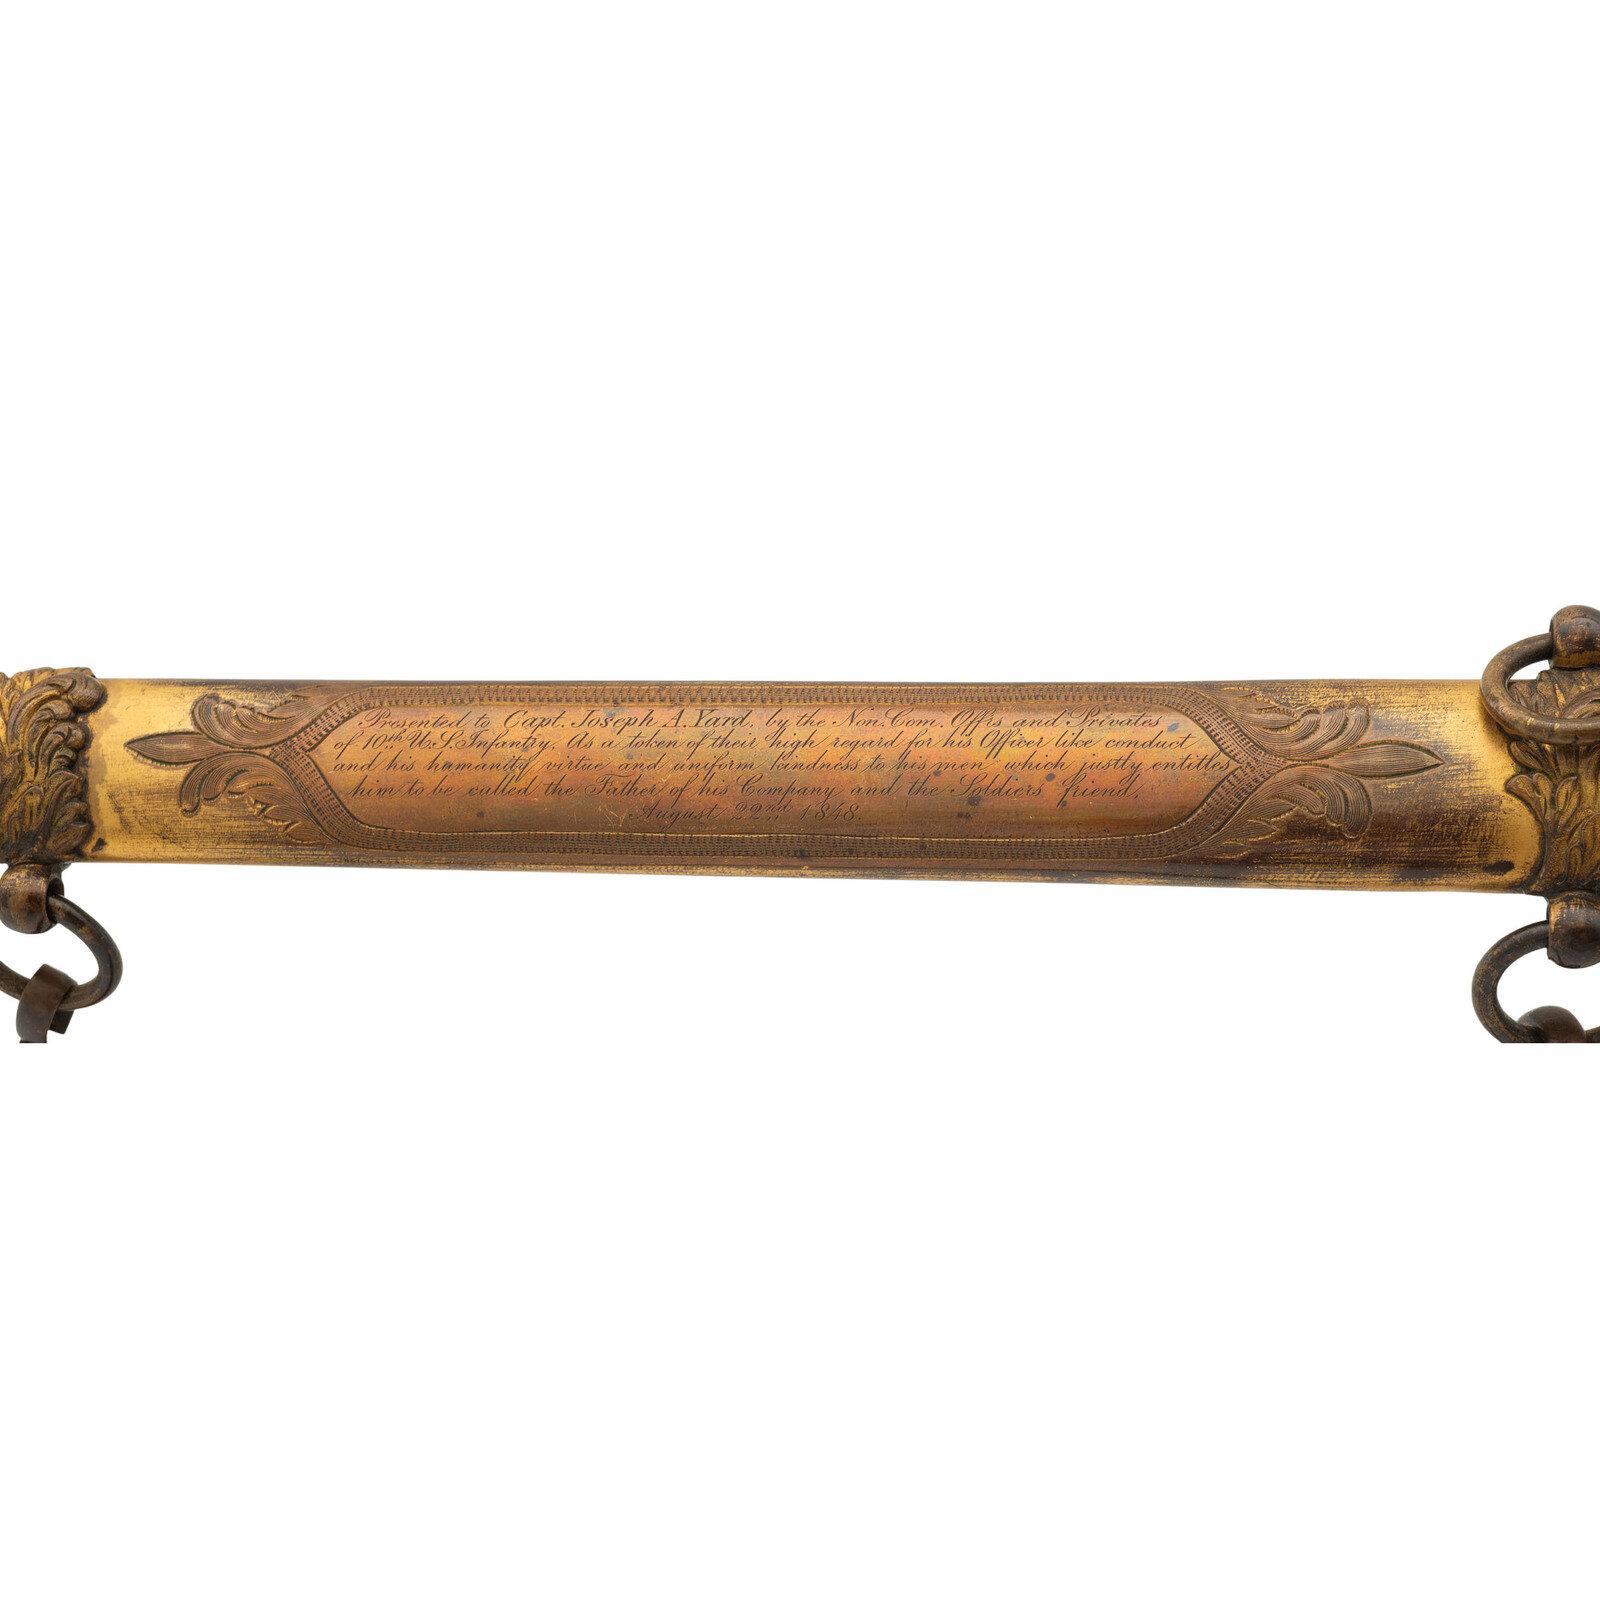 The Mexican American War Knight's Pommel Presentation Sword of Capt. Joseph A. Yard - 10th US In